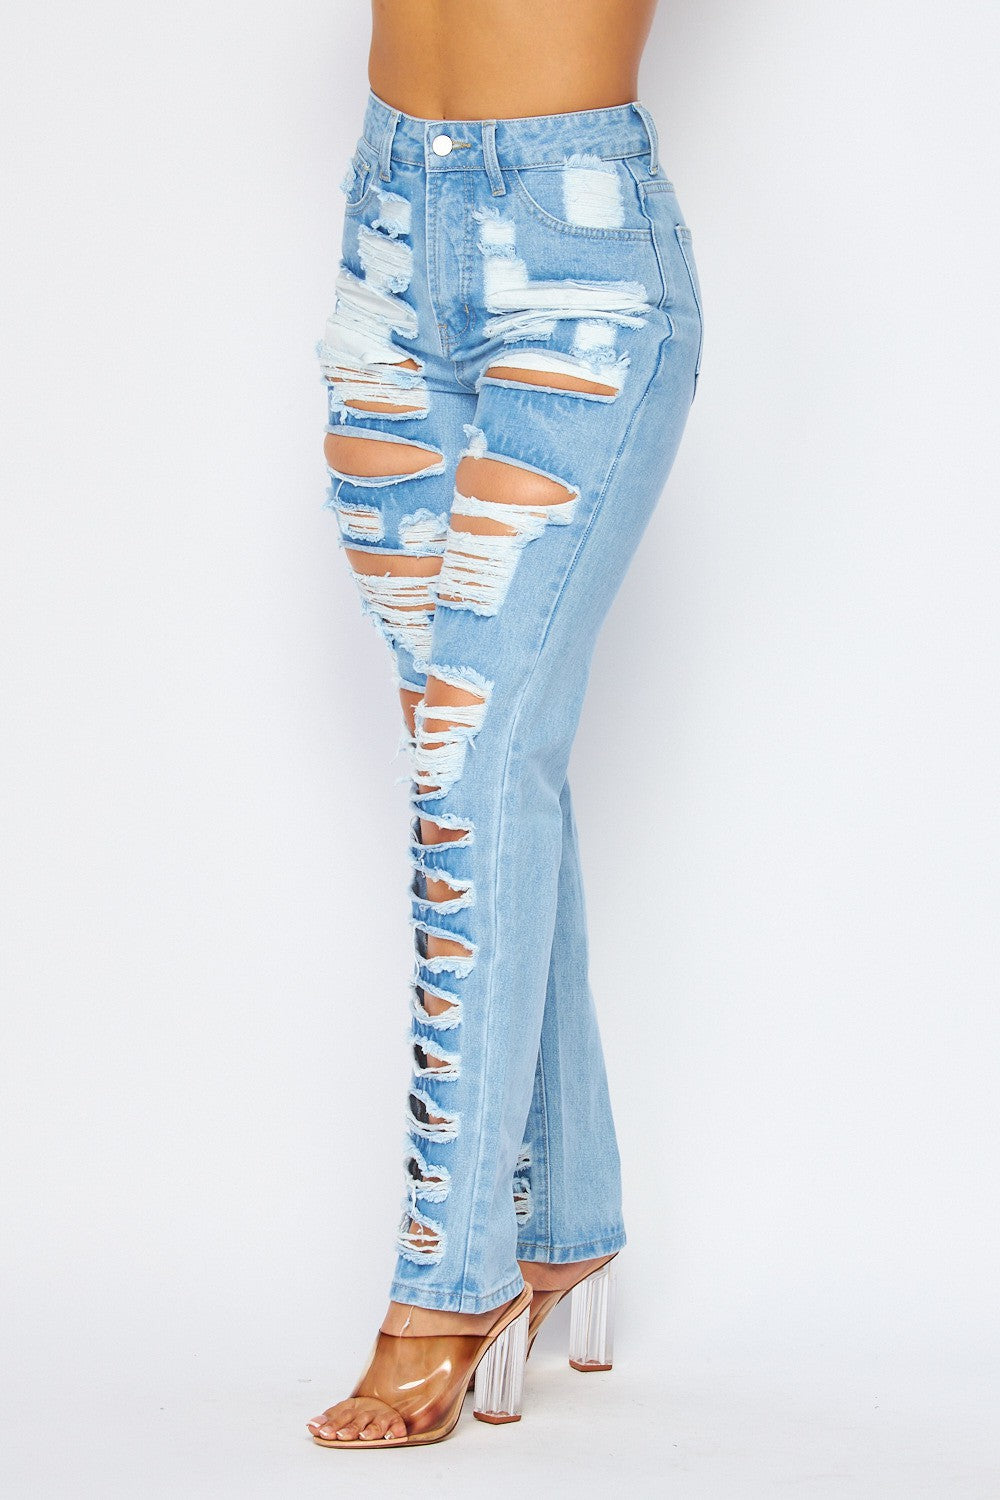 Trust Me Ripped and Distressed Denim Jean Pants